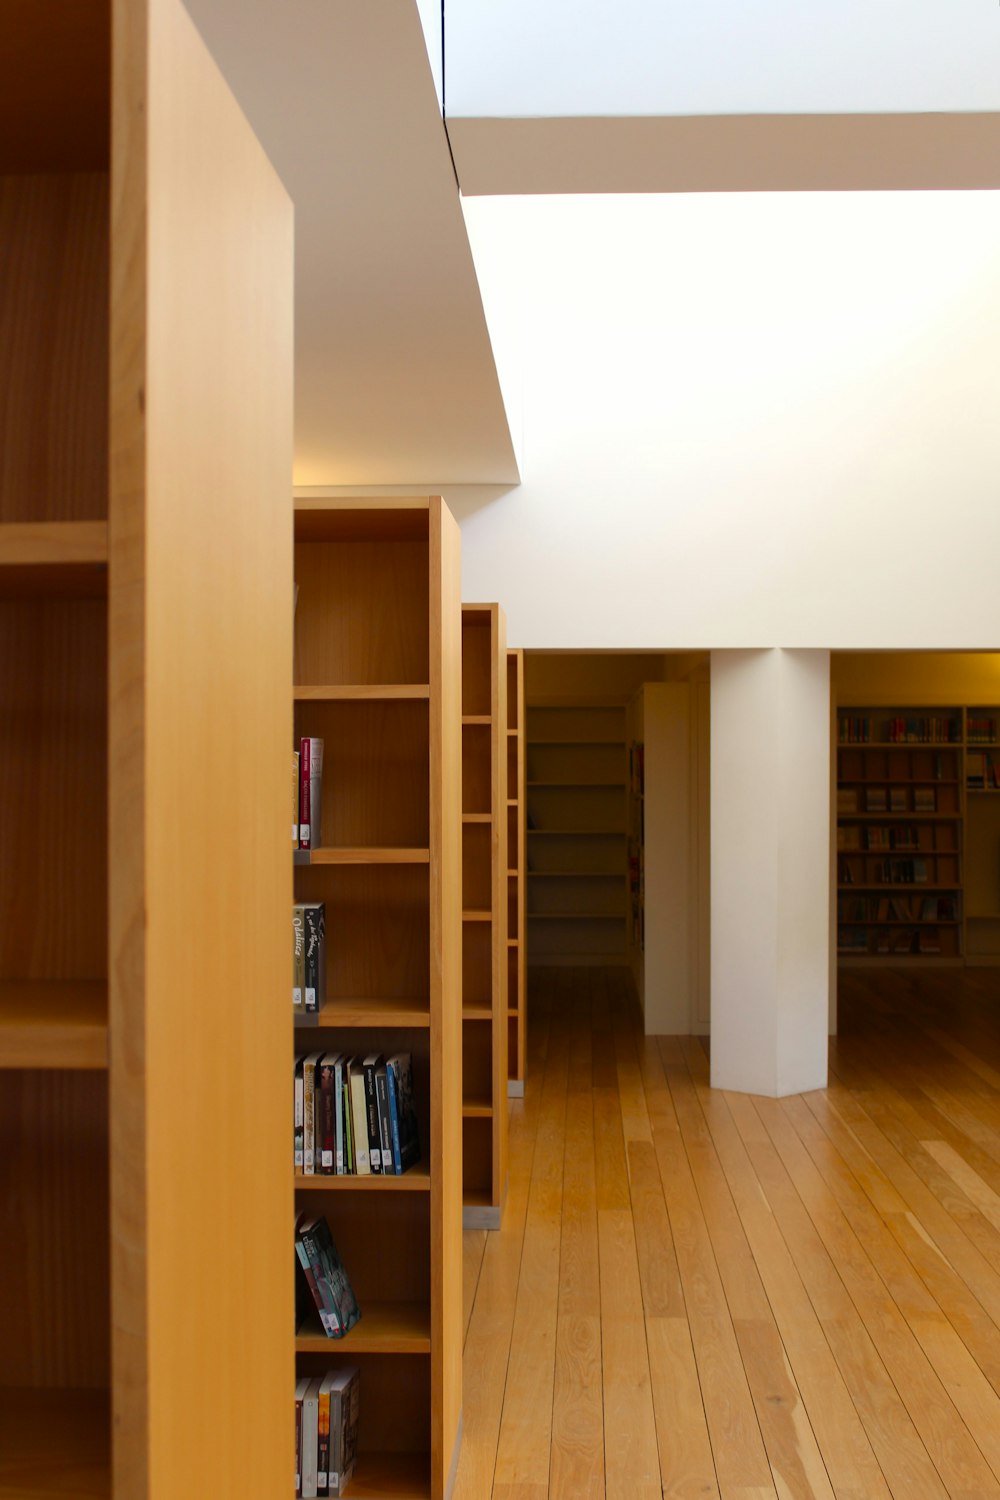 a room with bookshelves and a wood floor